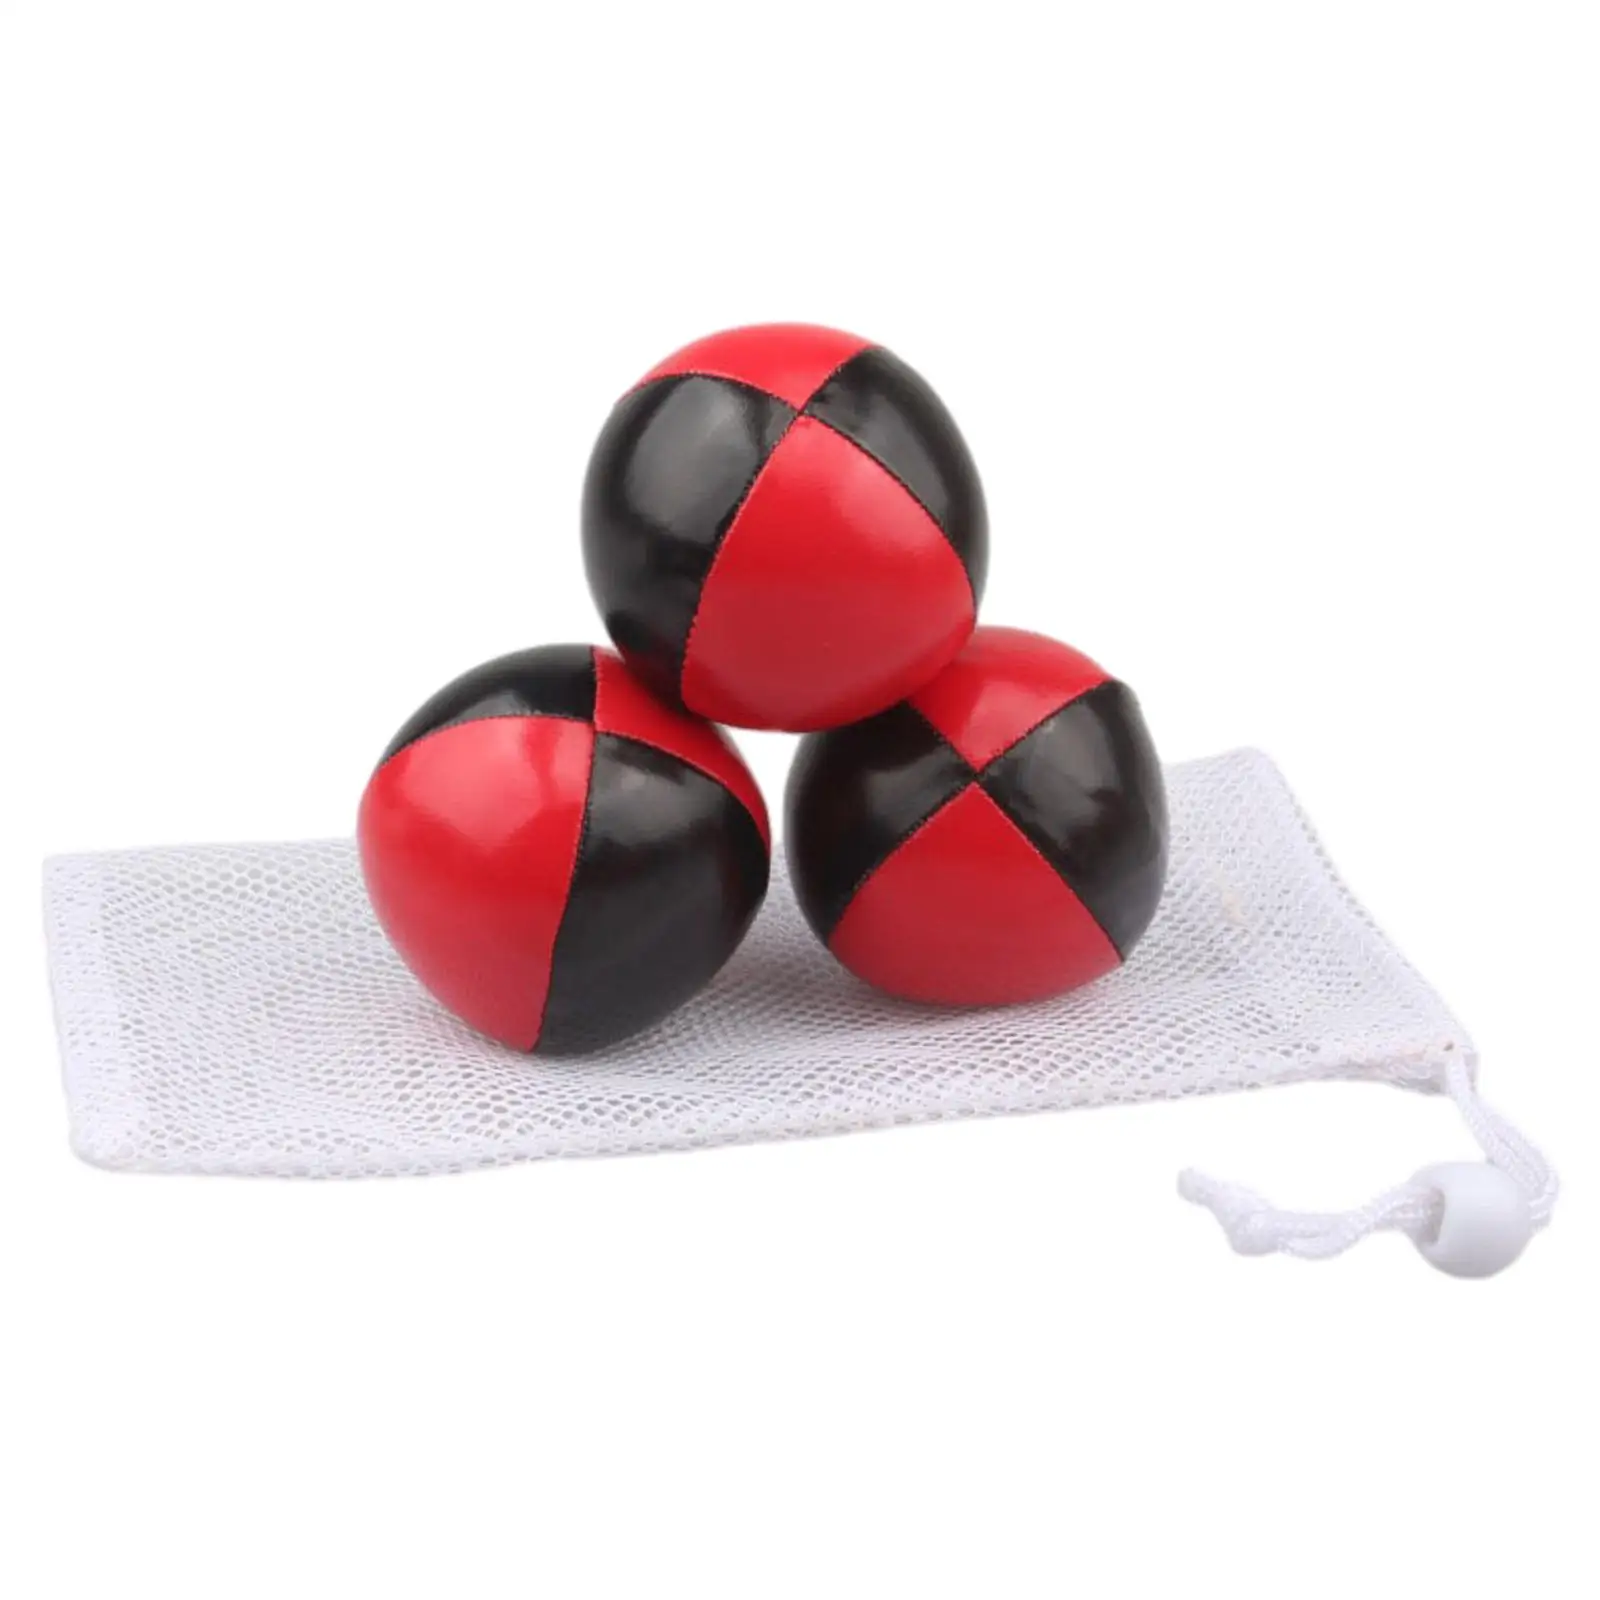 3 Pieces Juggling Balls Set for Beginners Easy to Grip Hand Throwing Juggling Toy Balls for Activity Kids and Adults Training